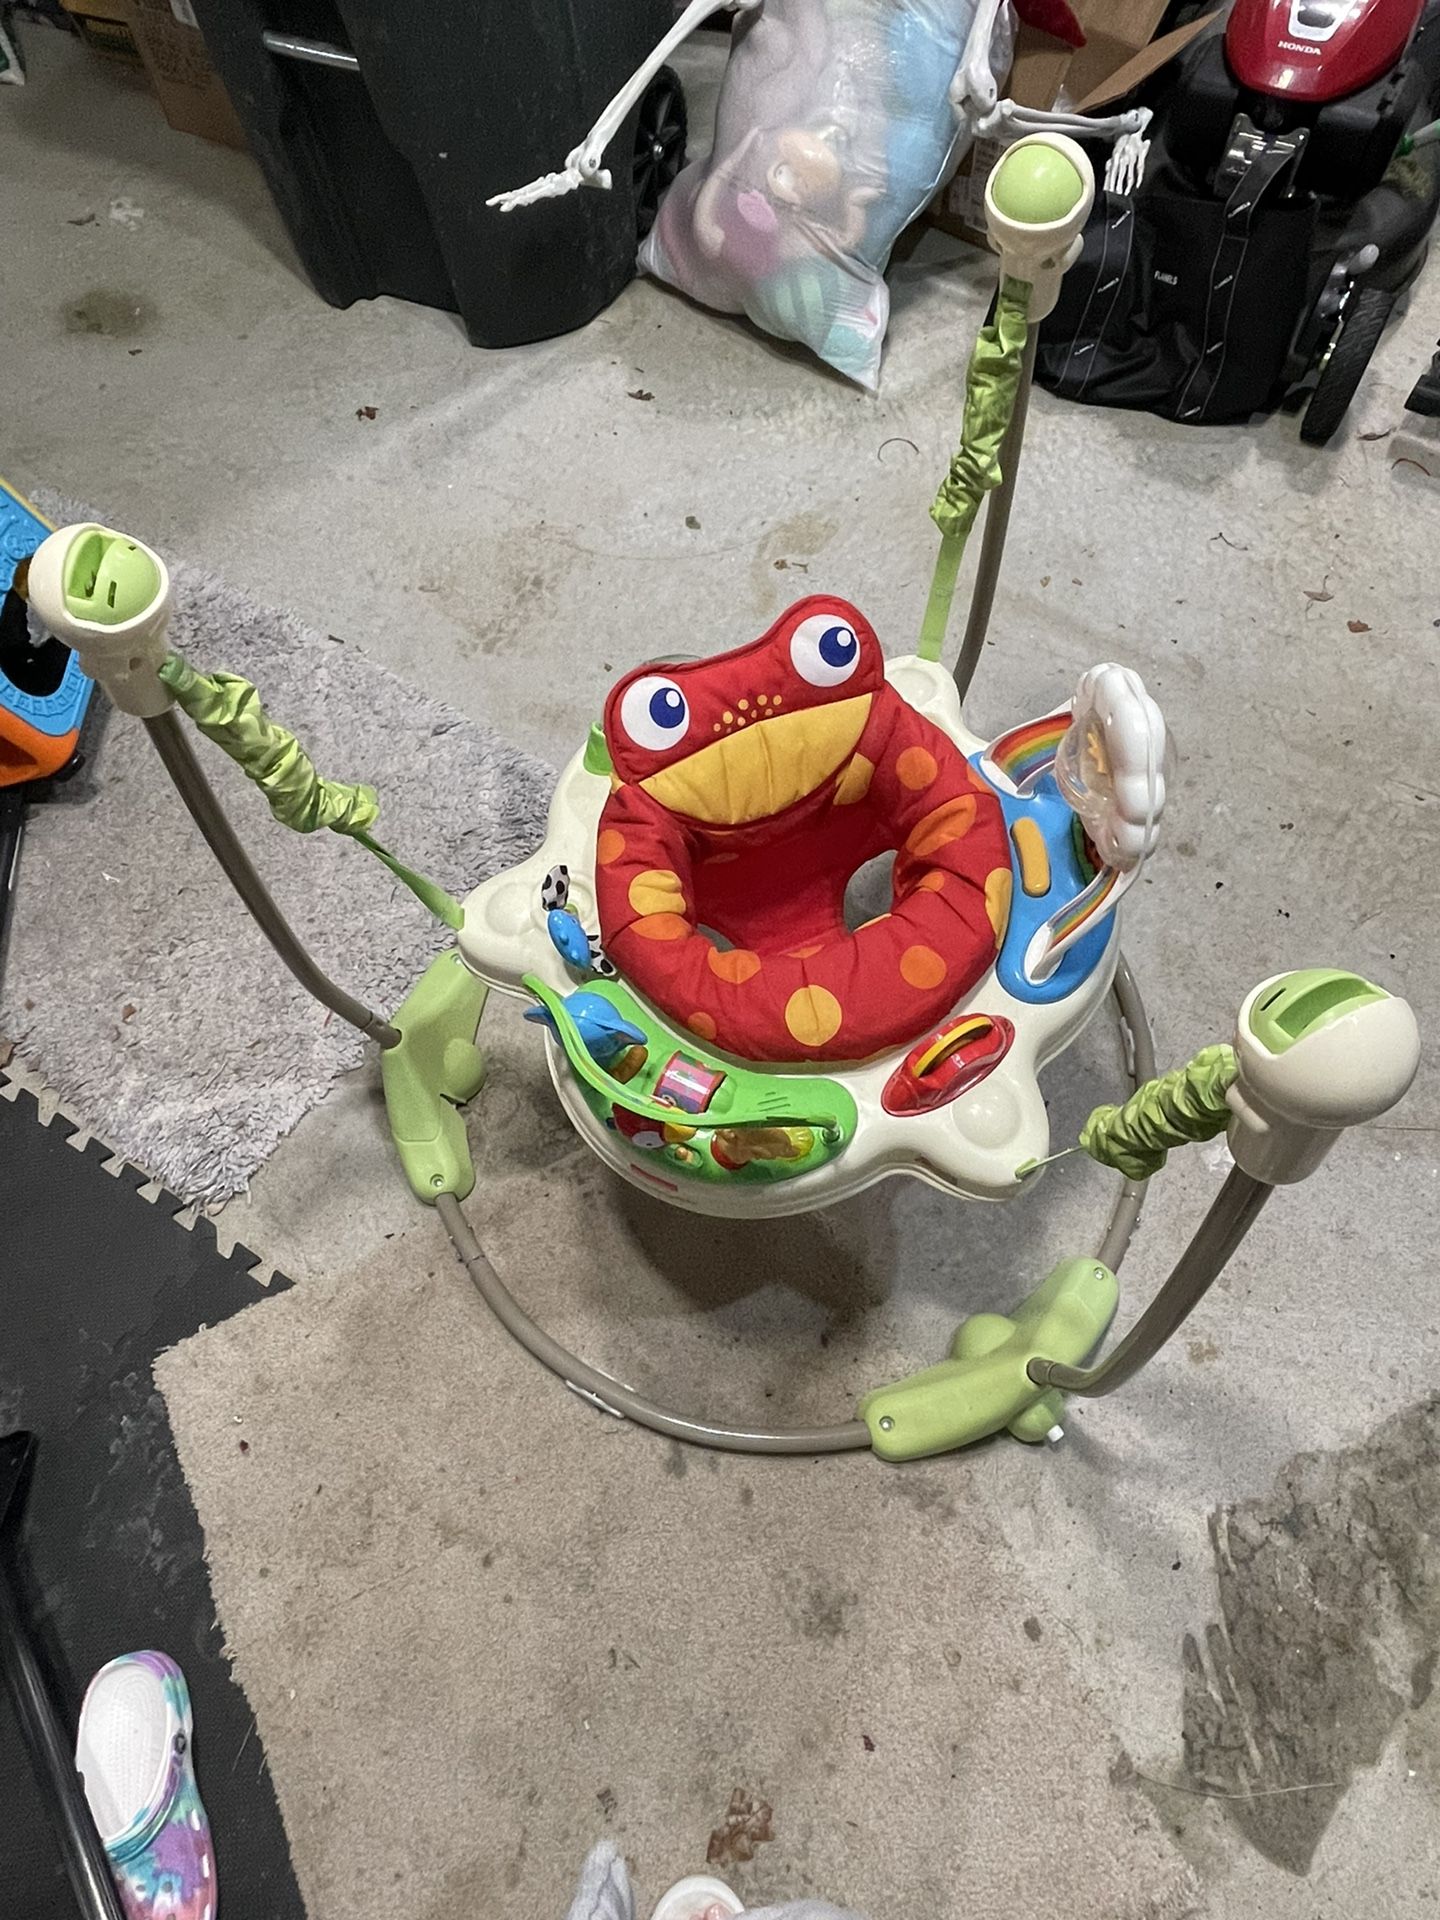 Fisher Price Jumperoo Rainforest 